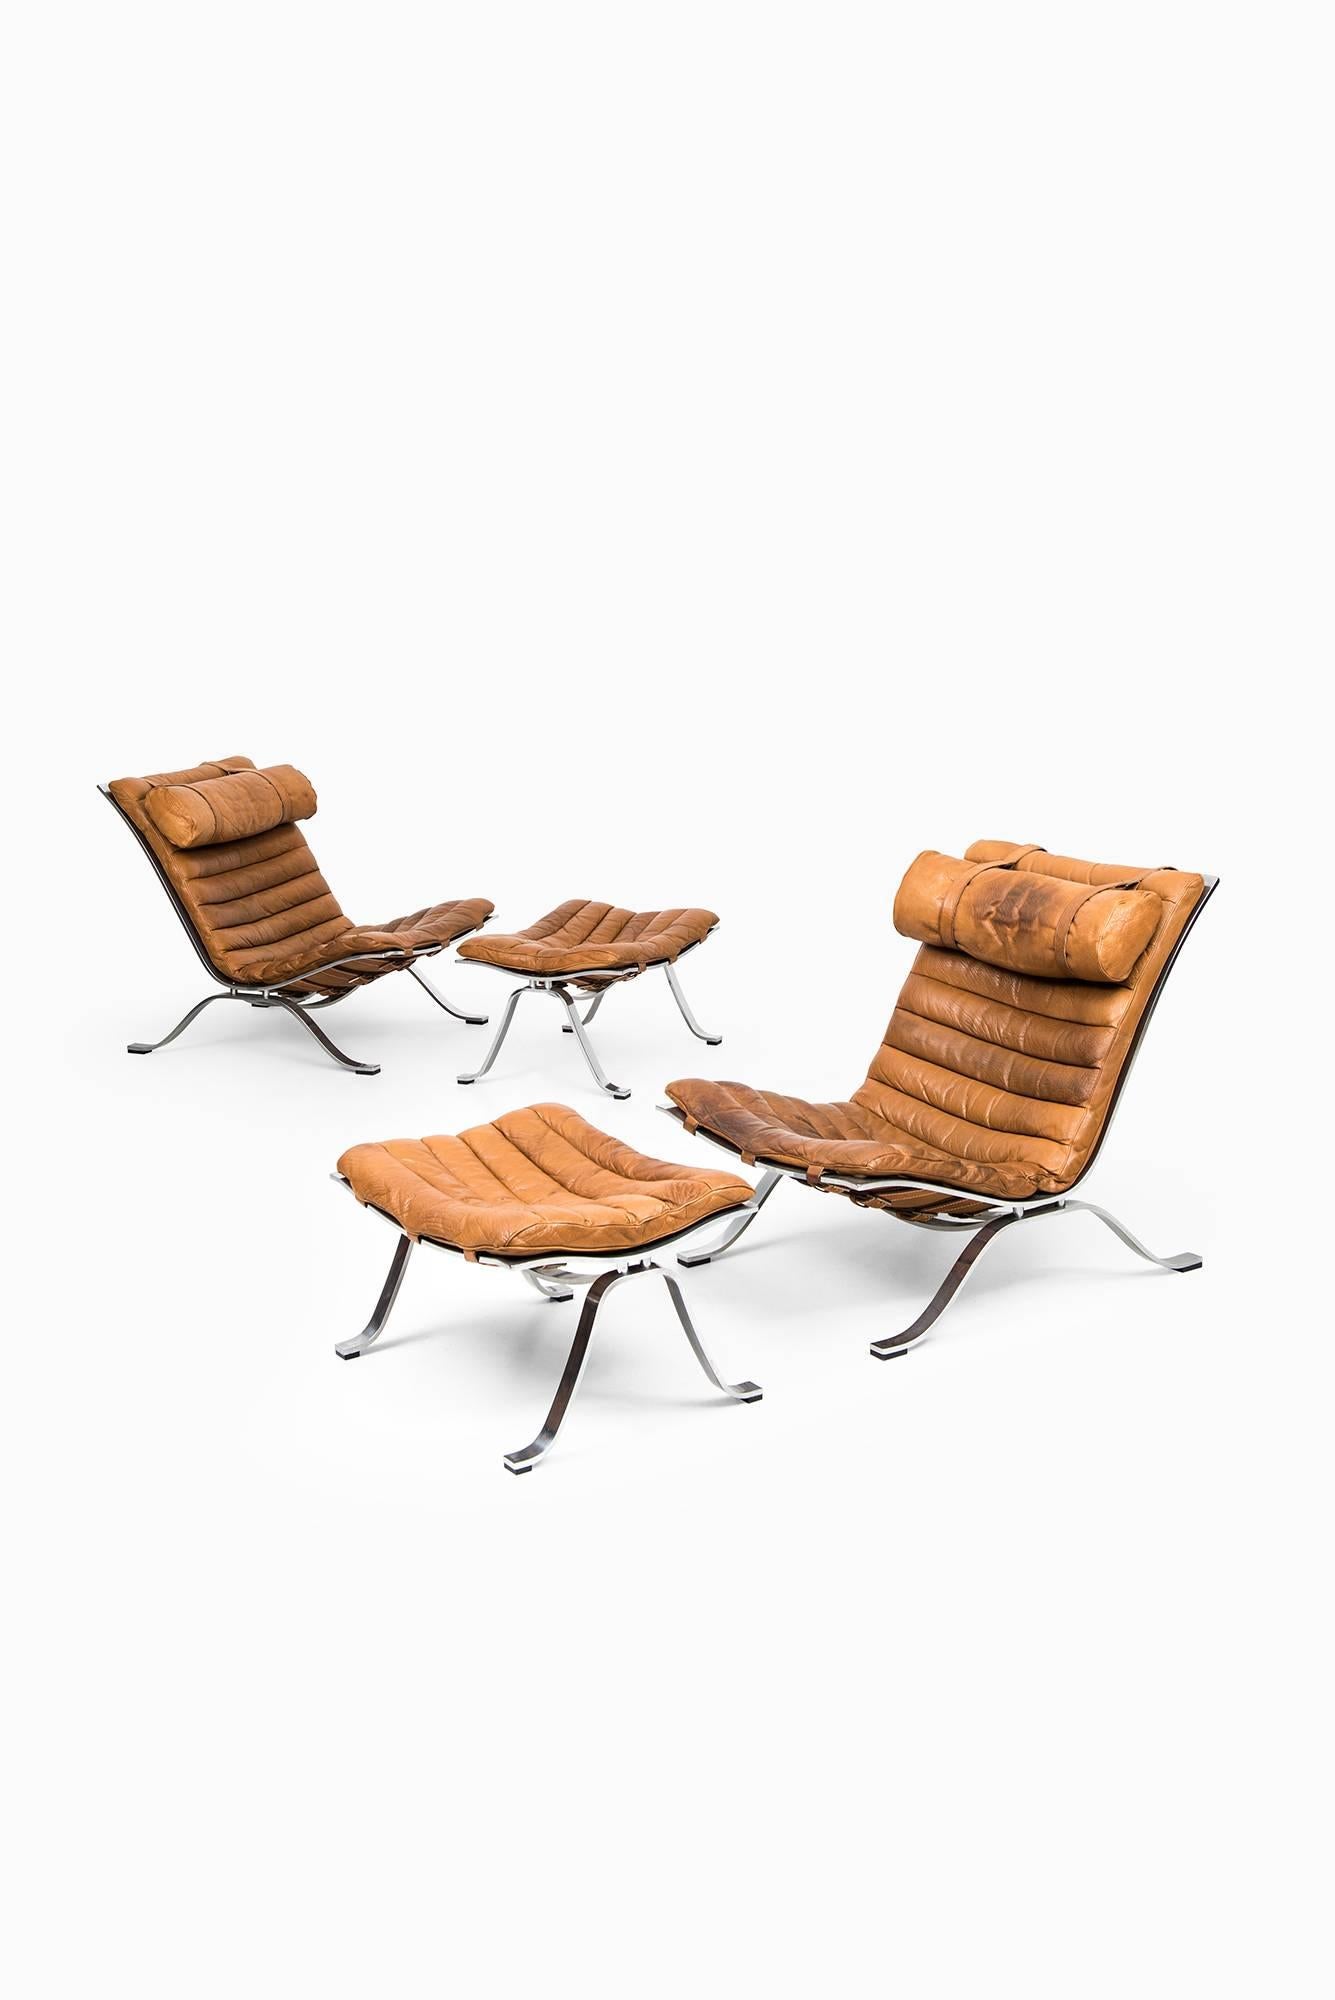 Rare pair of easy chairs with foot stools model Ari designed by Arne Norell. Produced by Arne Norell AB in Aneby, Sweden.